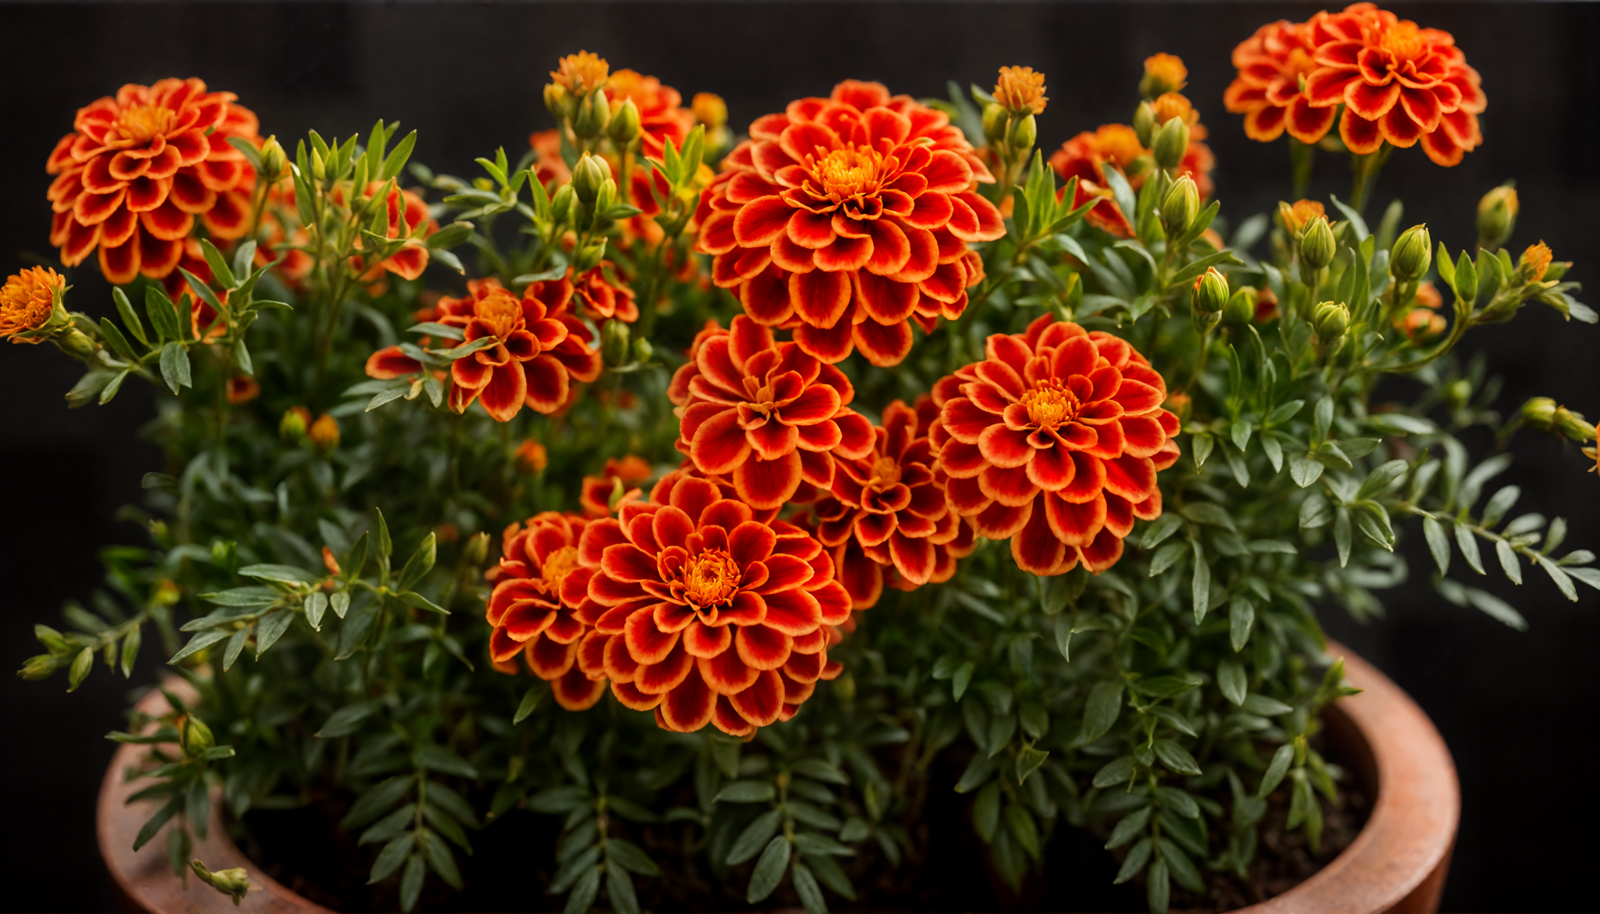 Vibrant red and orange Tagetes erecta flowers arranged in a bowl, with clear lighting against a dark background.